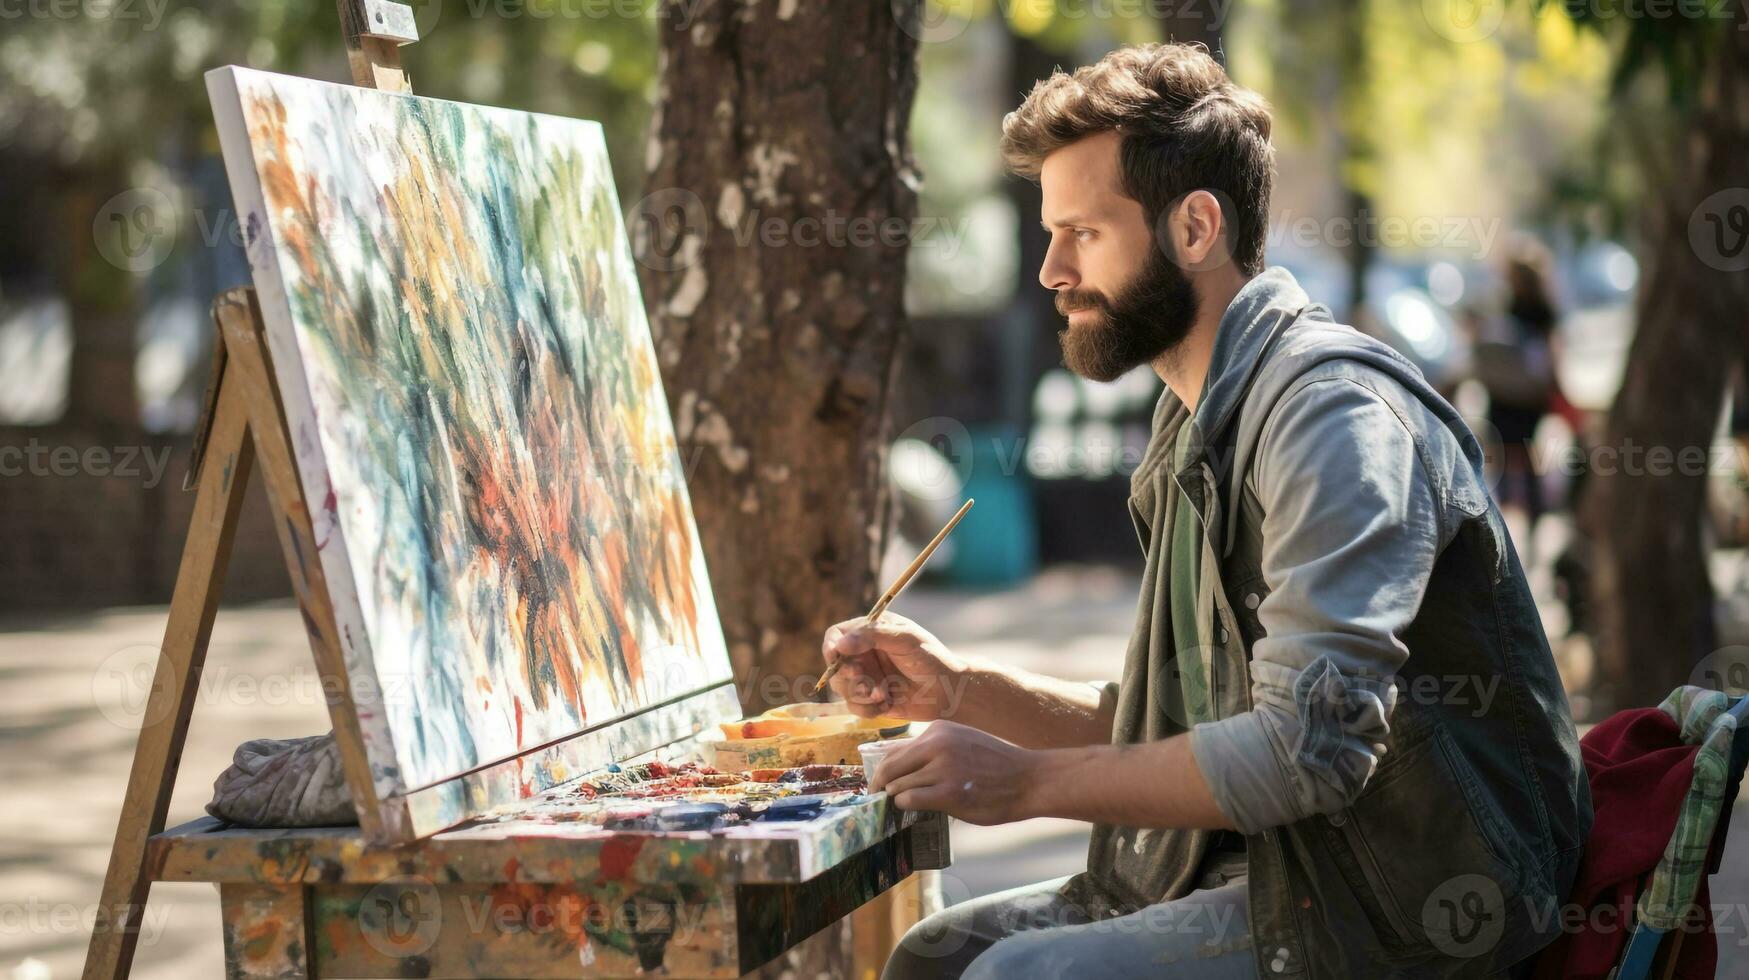 A candid shot of a person painting on a park bench, mental health images, photorealistic illustration photo